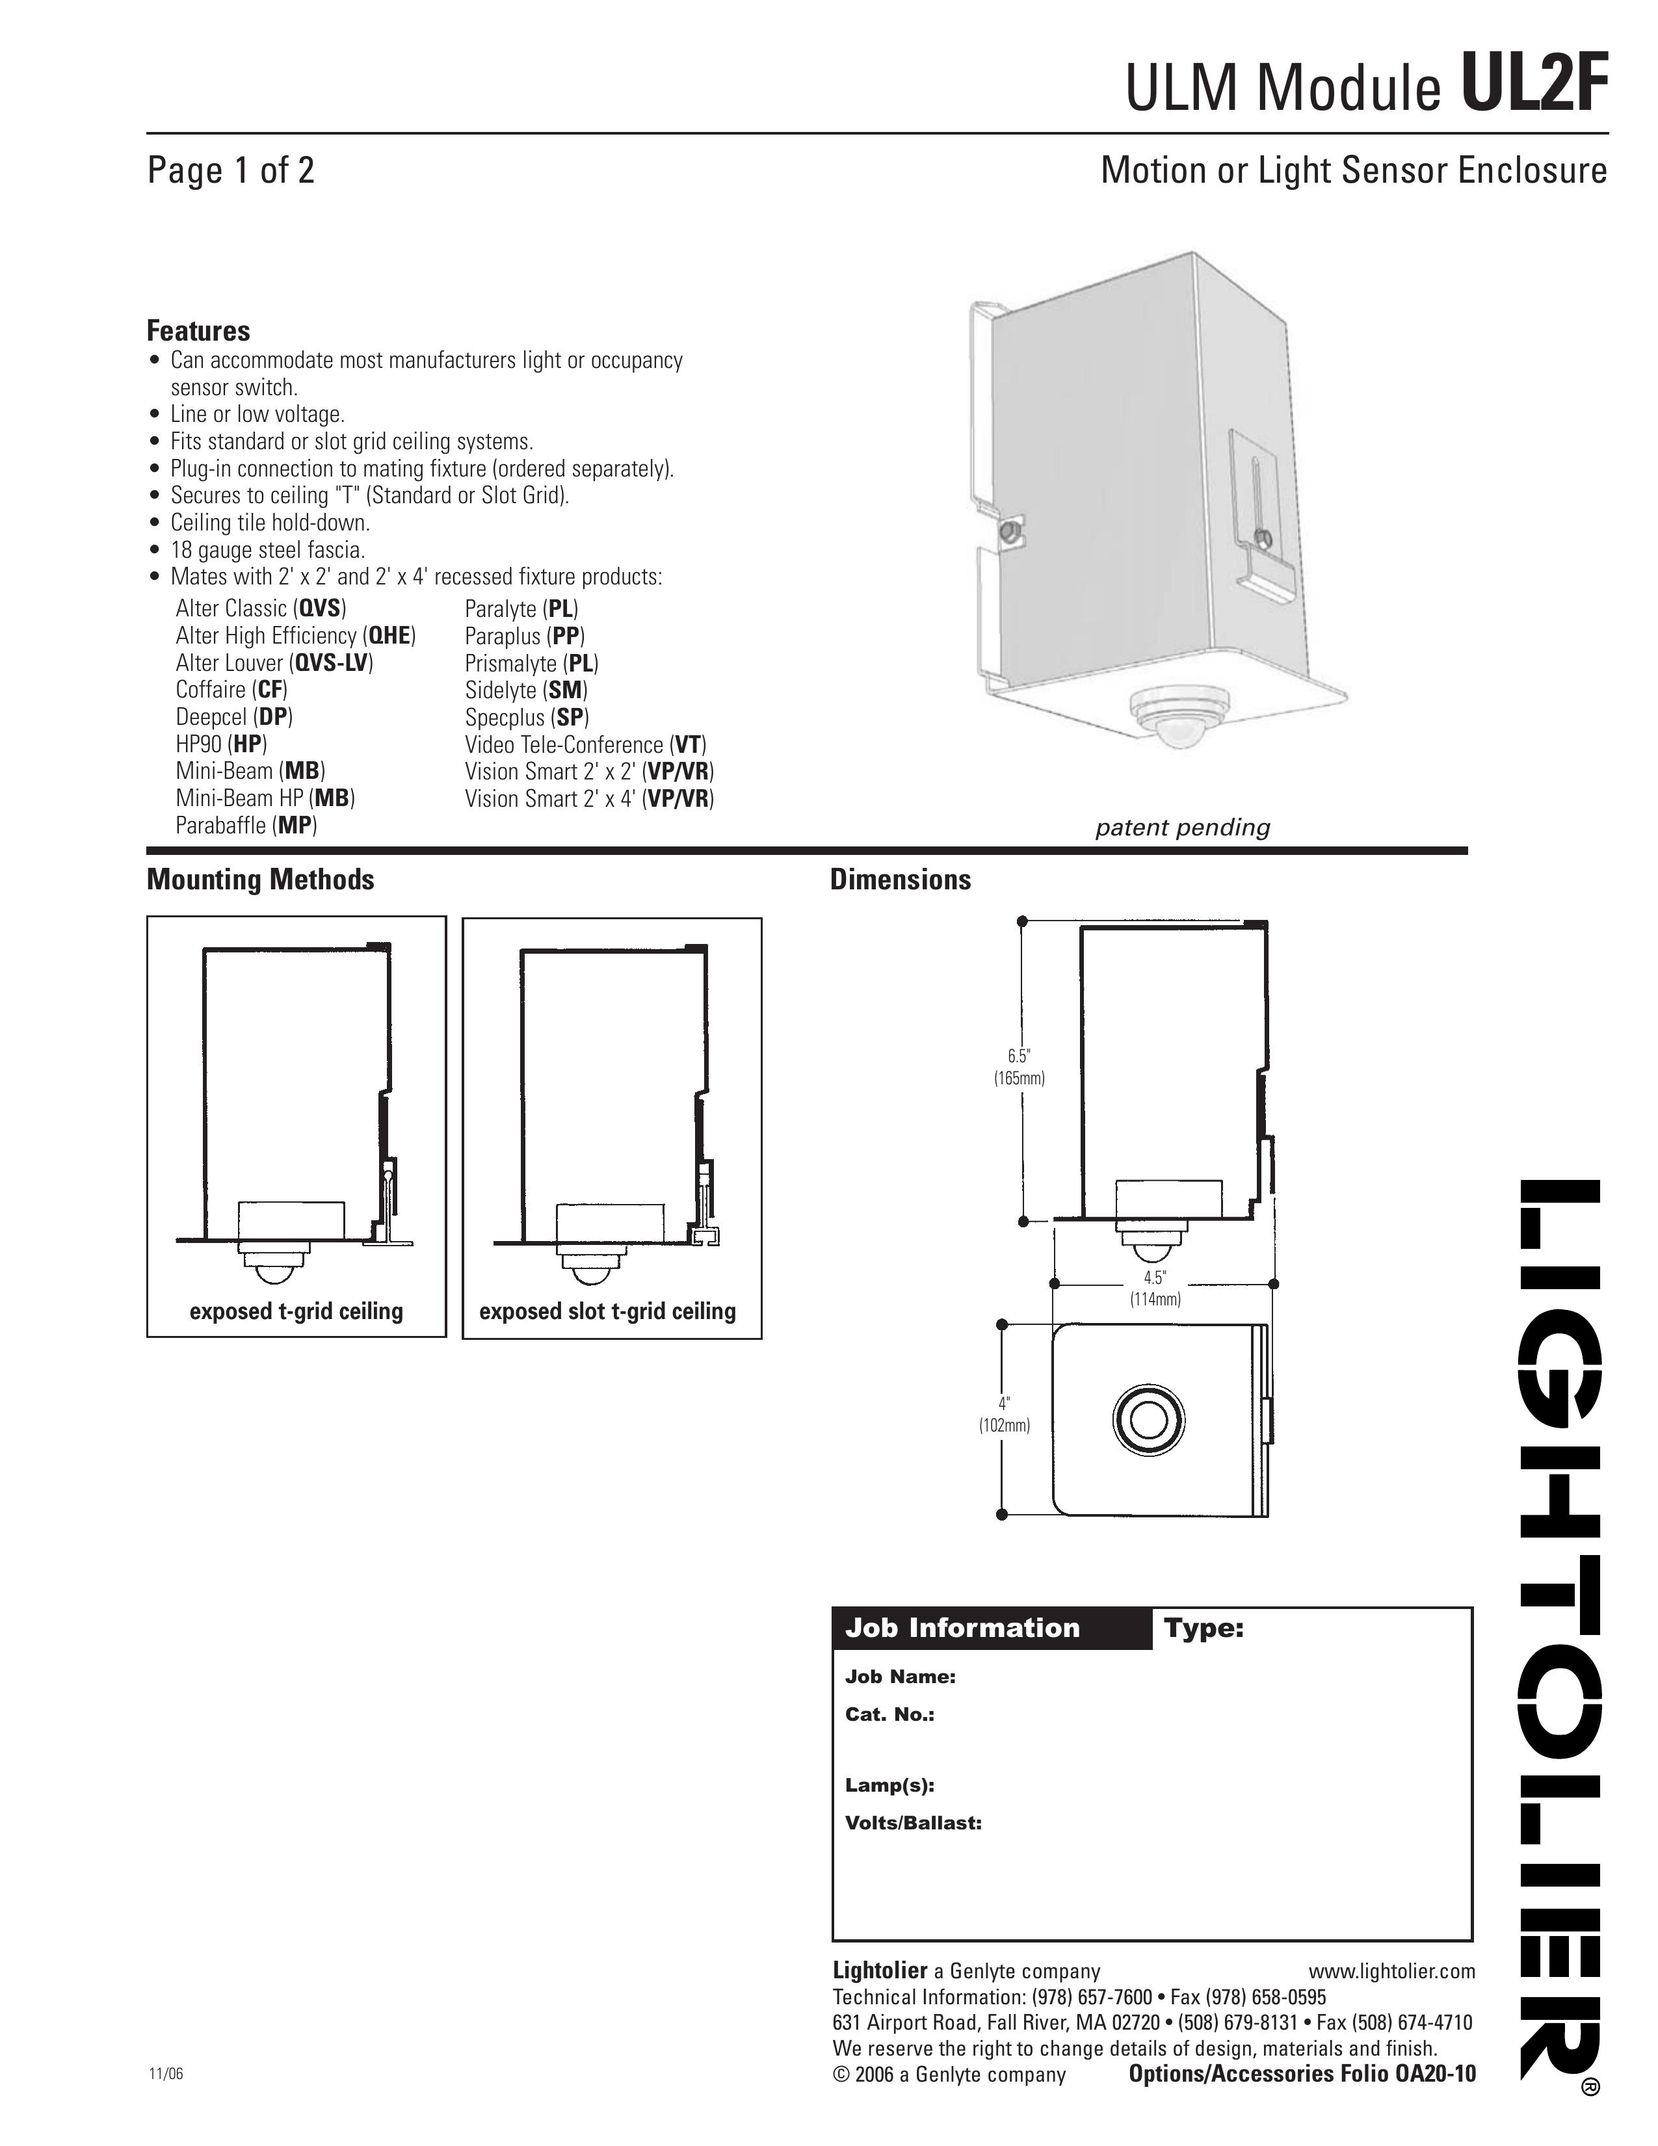 Lightolier OA20-10 Home Safety Product User Manual